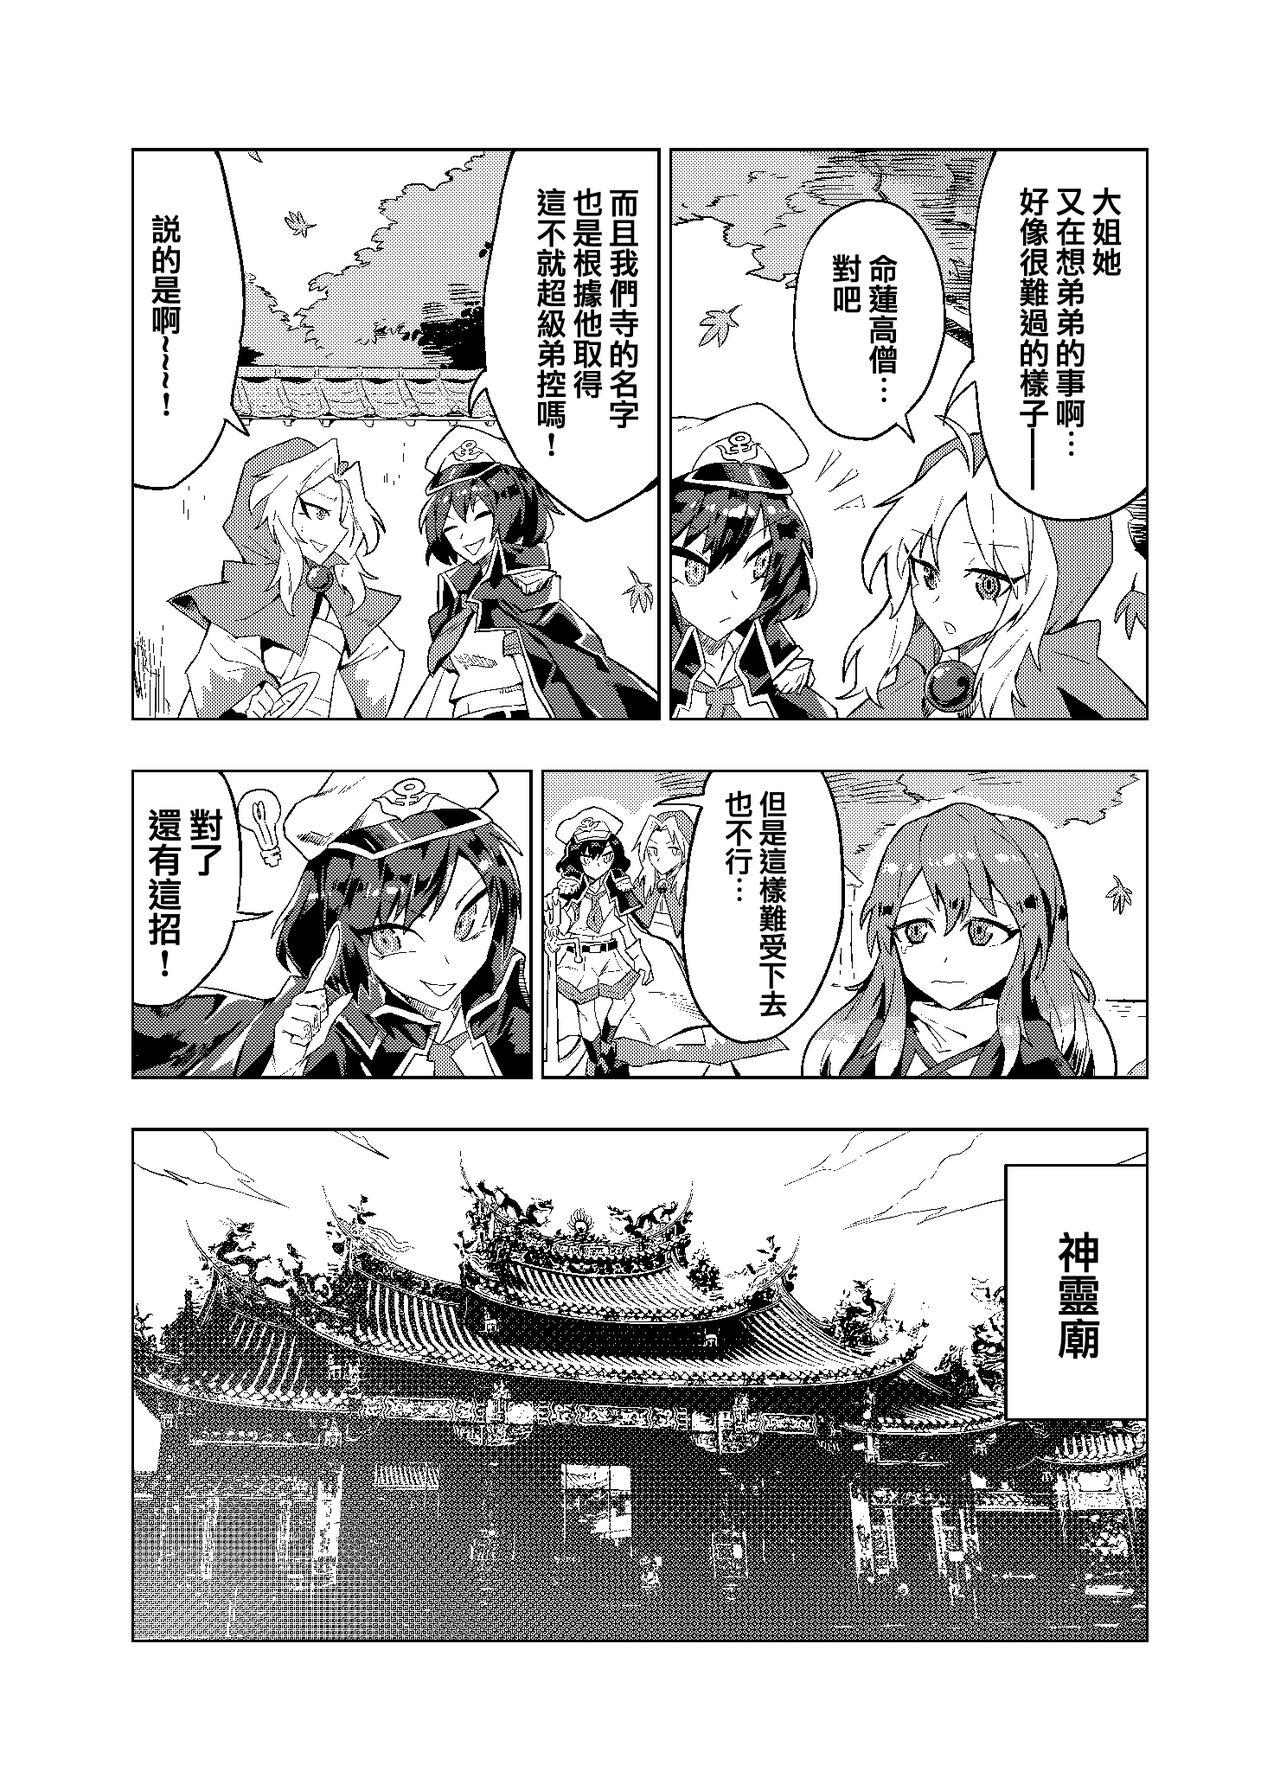 Lick 弟控圣和换装太子（Touhou Project） - Touhou project Hardcore - Page 4